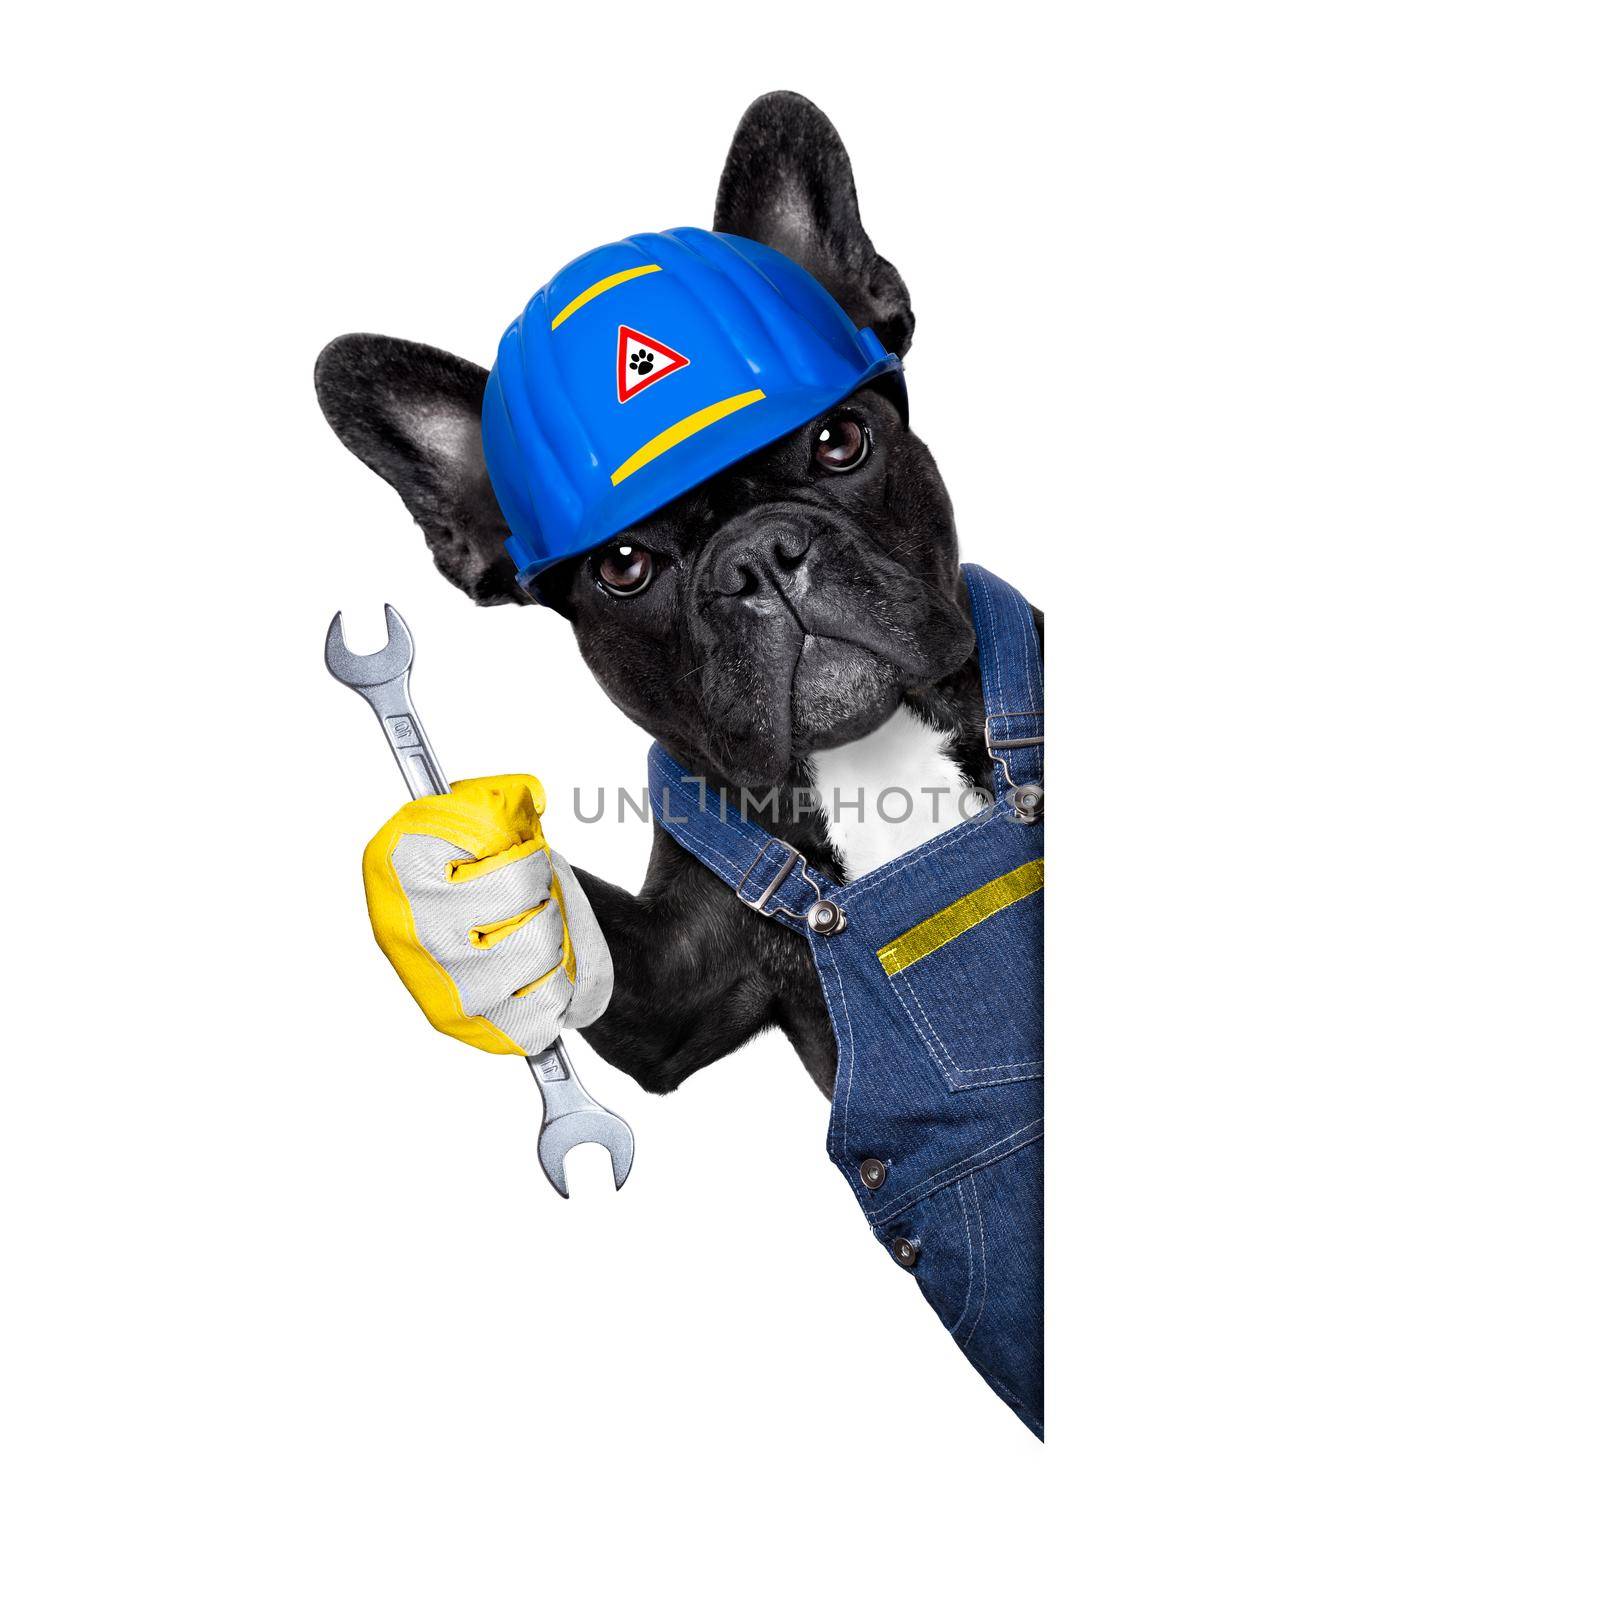 handyman dog worker with helmet  behind blank white banner , wrench in hand ,ready to repair, fix everything at home, isolated on white background